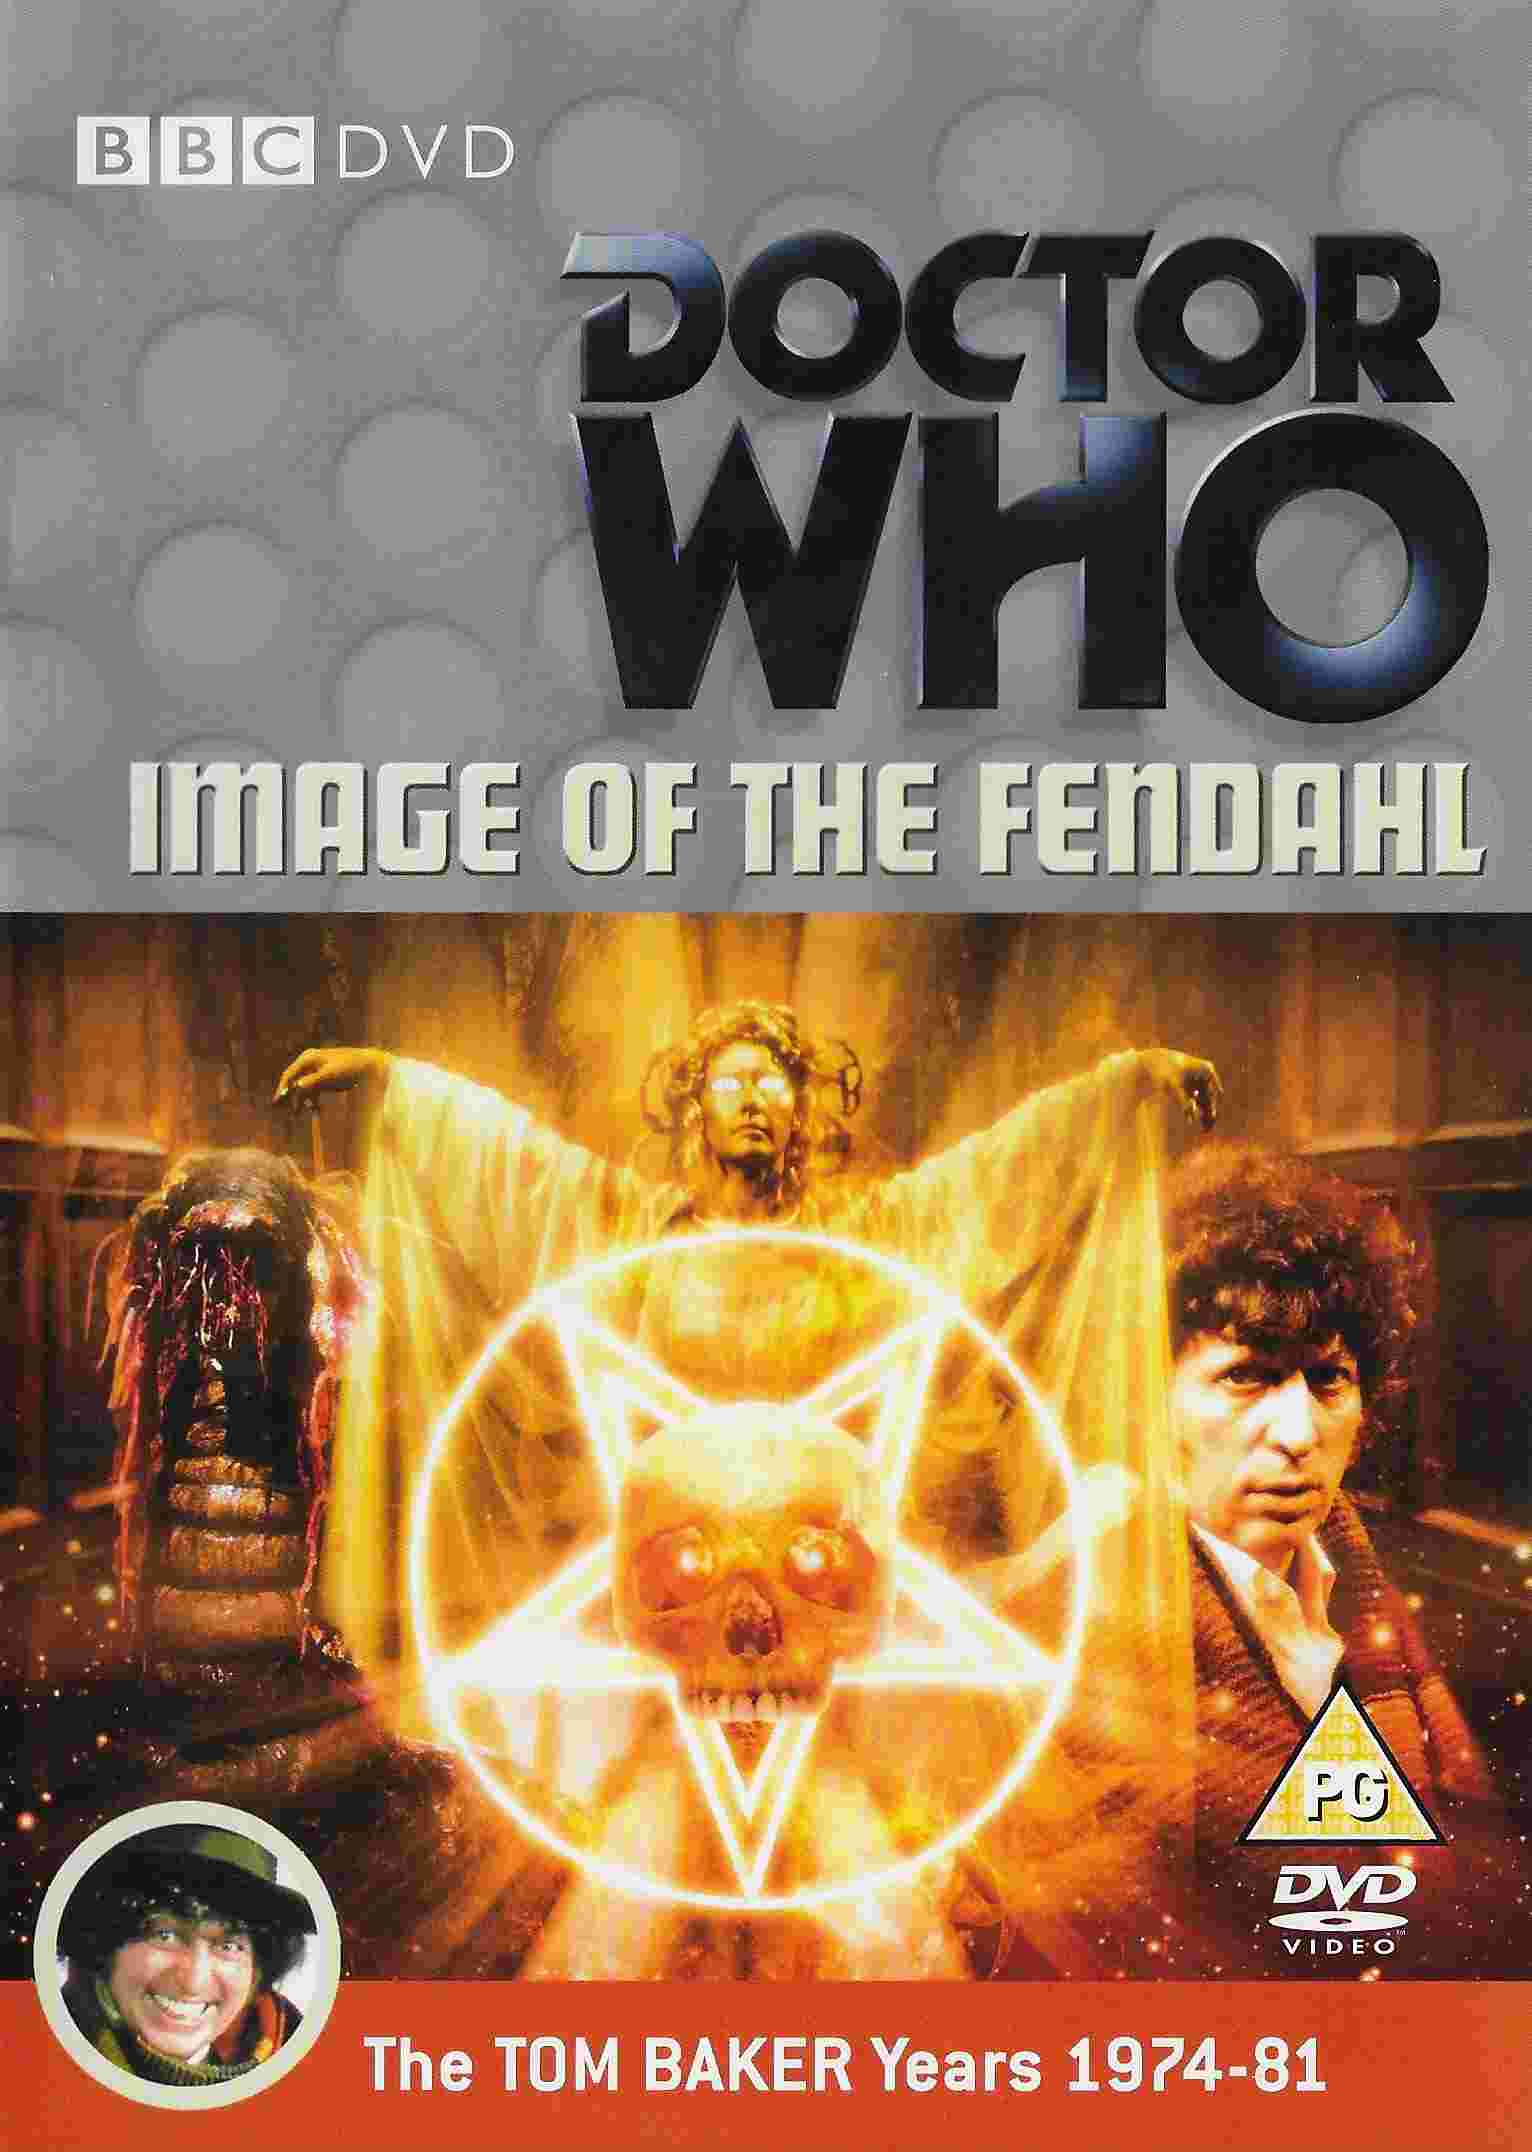 Picture of BBCDVD 1820 Doctor Who - Image of the Fendahl by artist Chris Boucher from the BBC dvds - Records and Tapes library